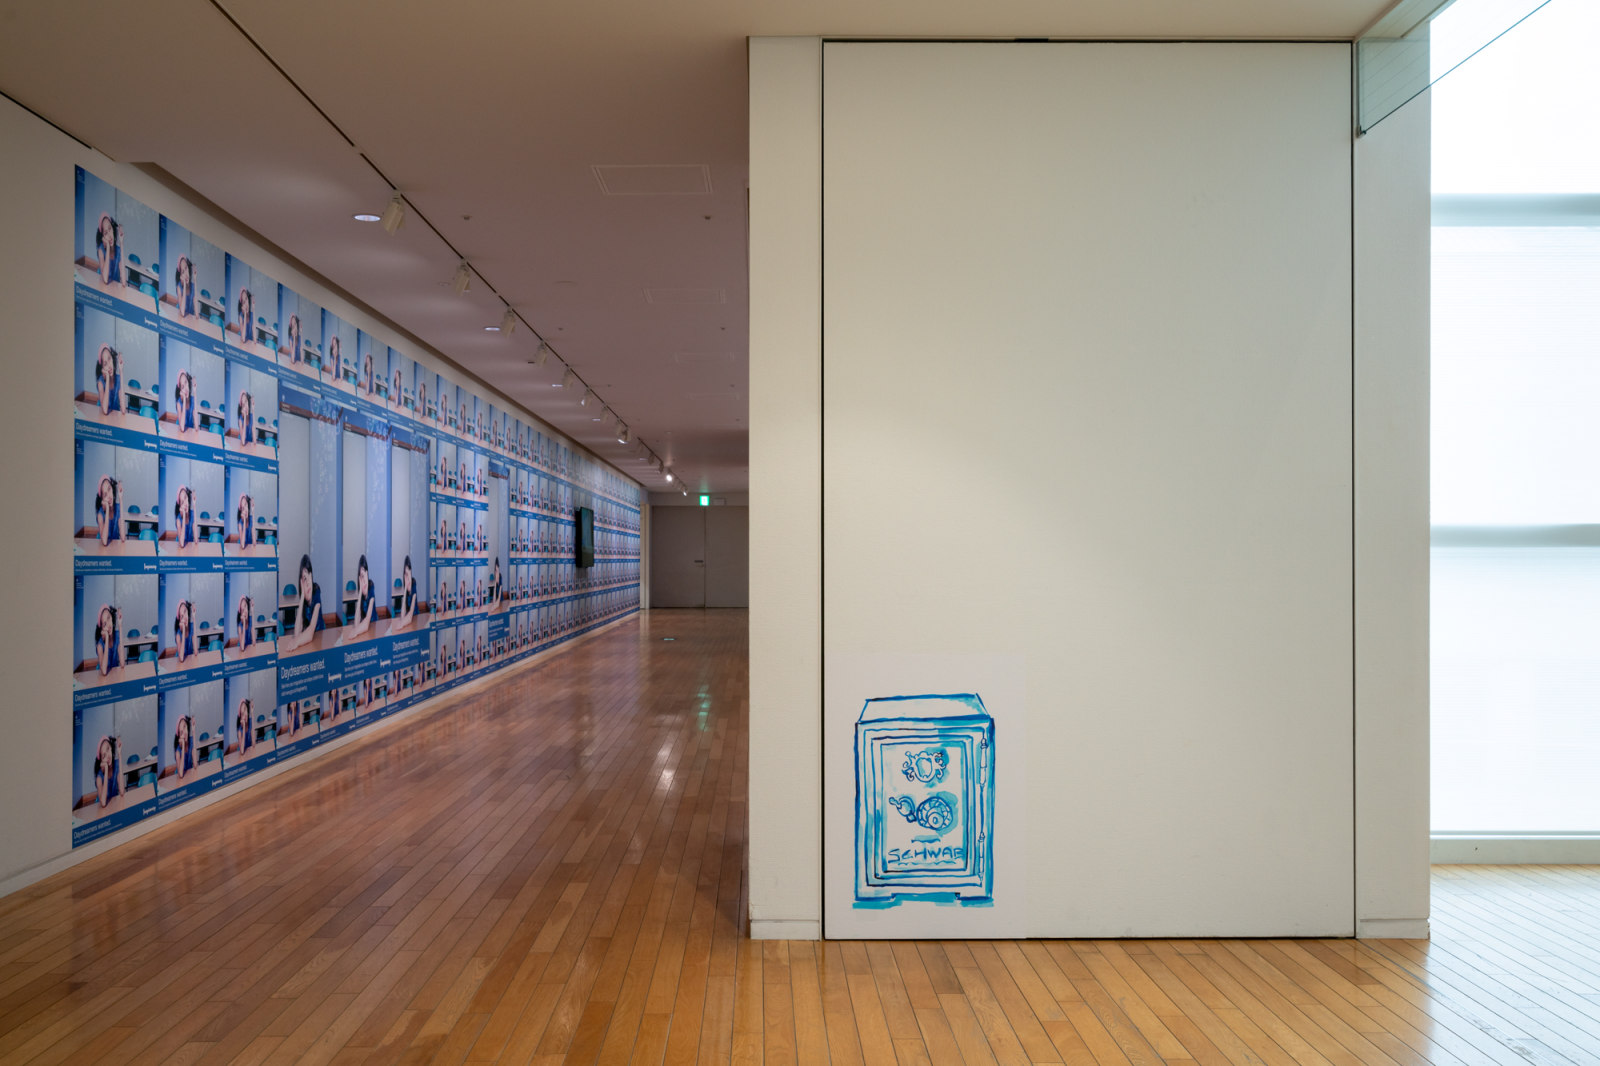 <div class="image_caption_container"><div class="image_caption">Exhibition view: <strong>The Markers of Our Time</strong>, Tokyo Opera City Art Gallery, 2022 </div></div>